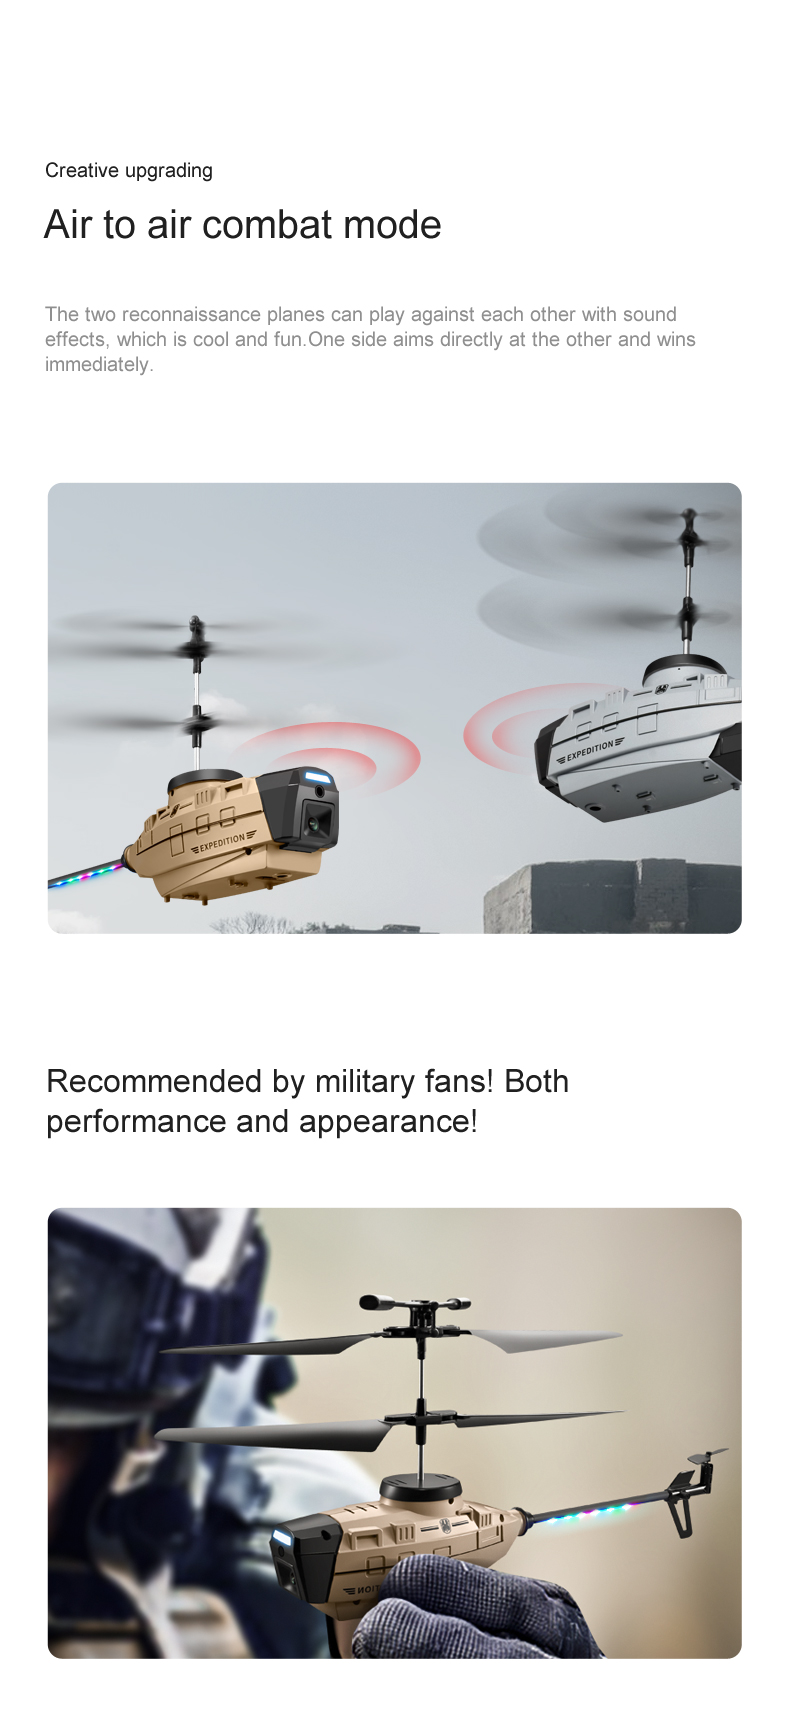 KY202 Black Bee 4CH 6-Axis 4K Dual Camera Air Gesture Obstacle Avoidance Intelligent Hover RC Helicopter RTF